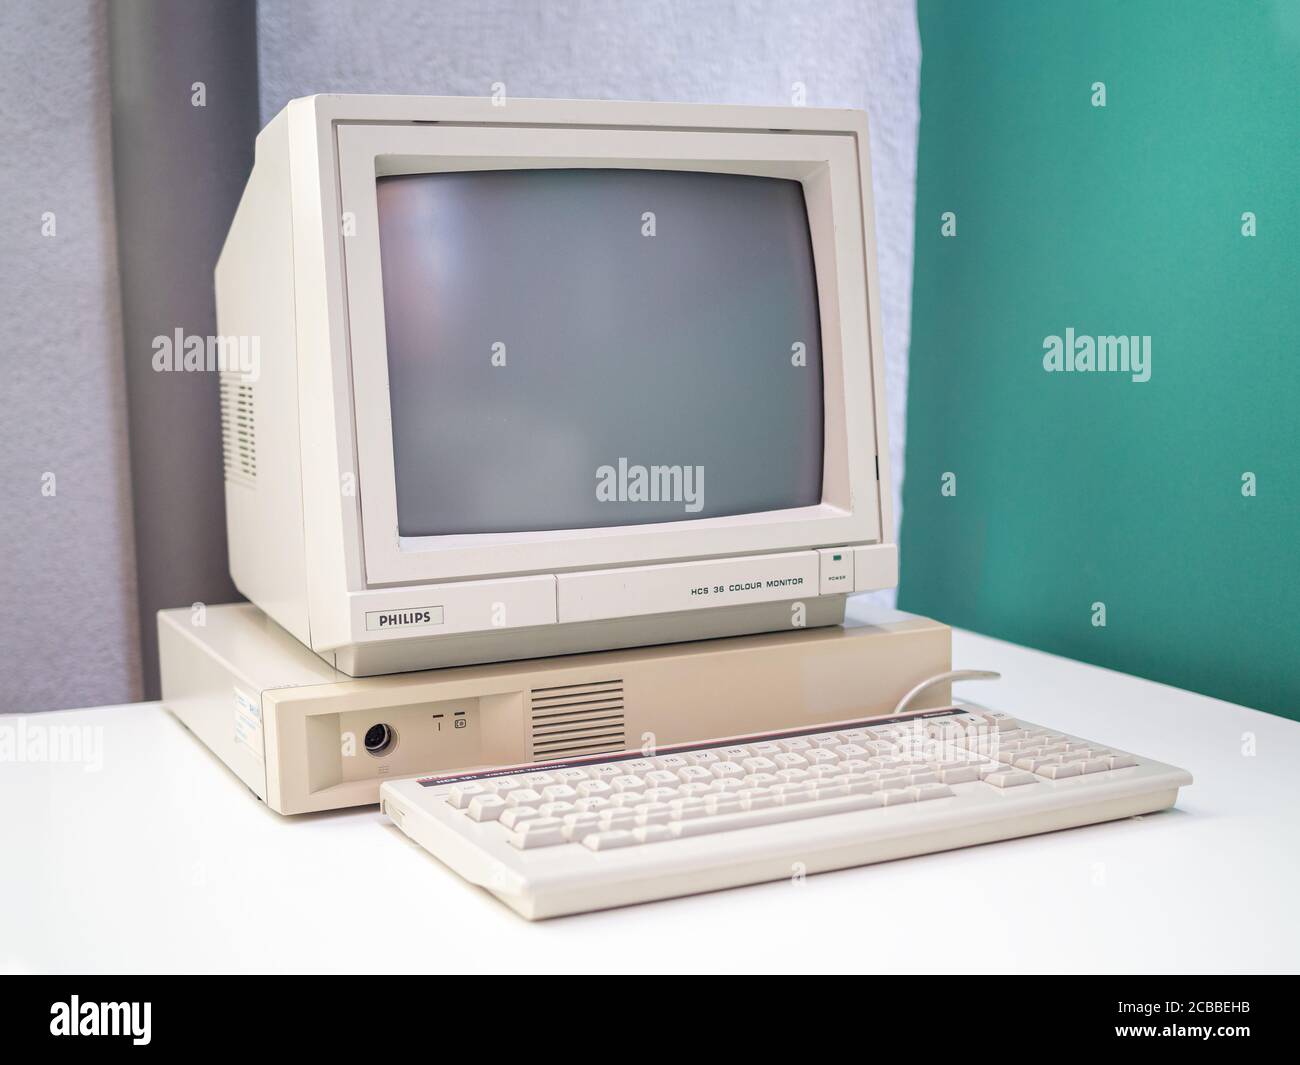 TERRASSA, SPAIN-AUGUST 9, 2020: 1987 Philips HCS 121 Personal Computer (Videotext Terminal) in the National Museum of Science and Technology of Catalo Stock Photo